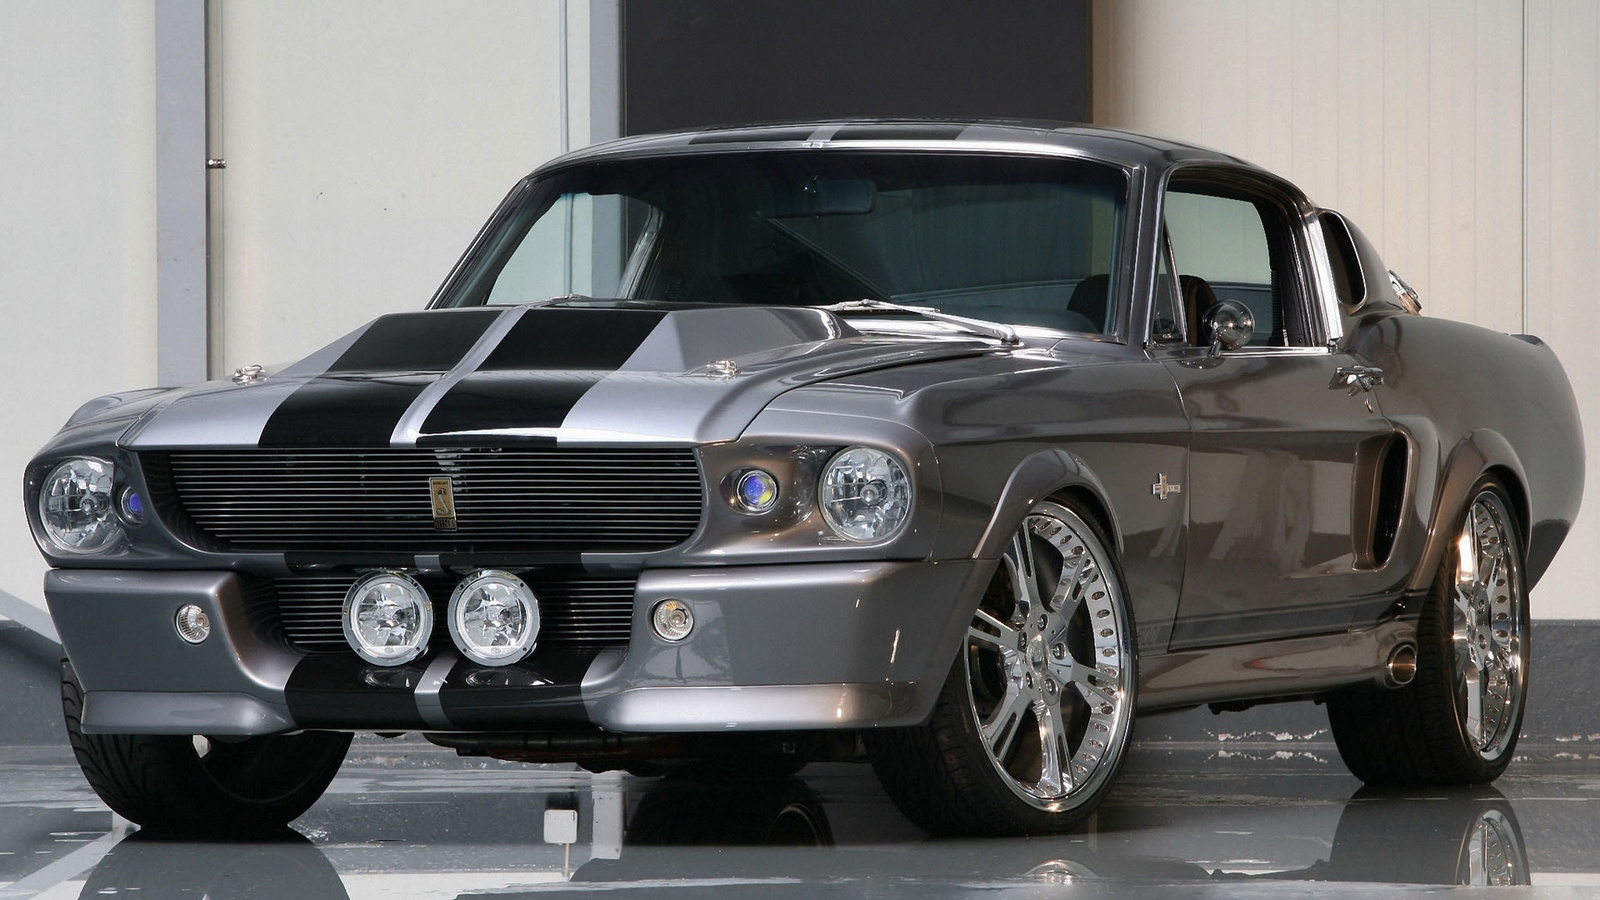 ford mustang, Muscle car, shelby gt500, , eleonor